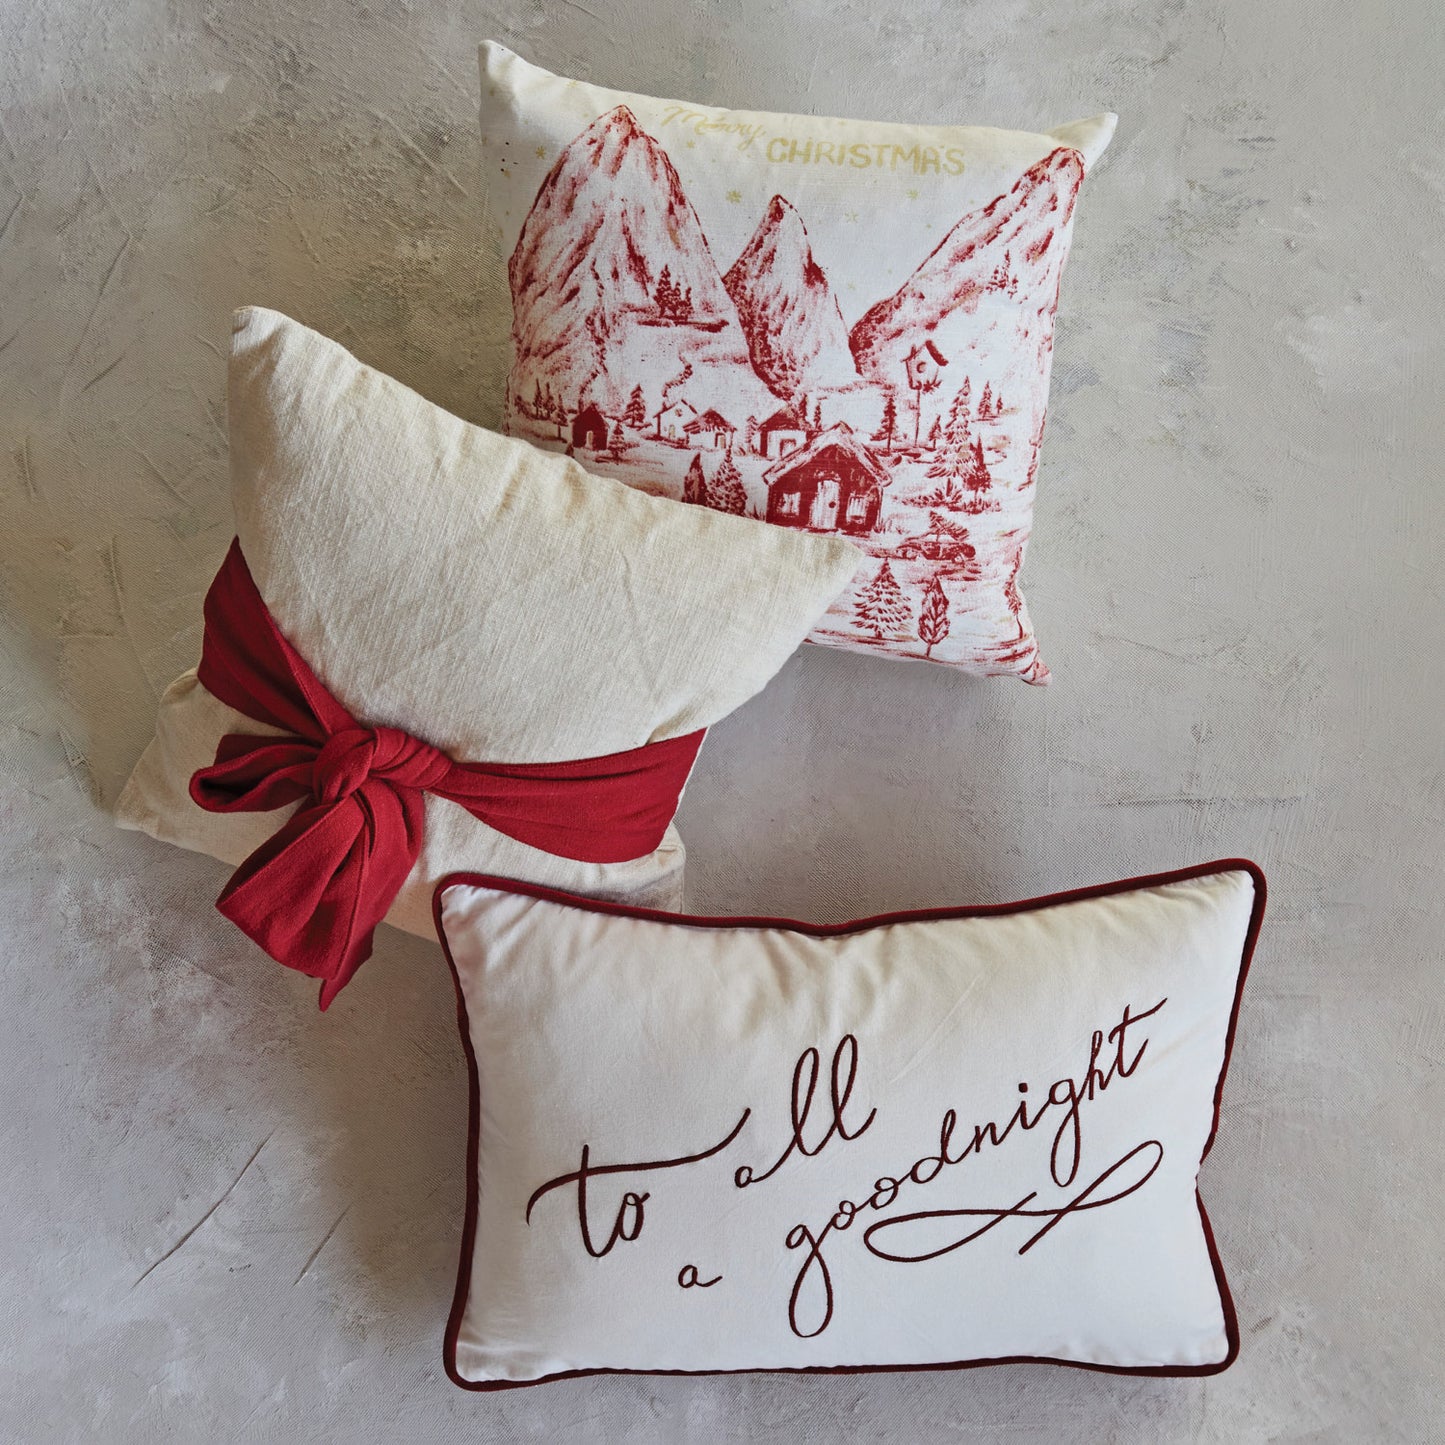 Bow Pillow